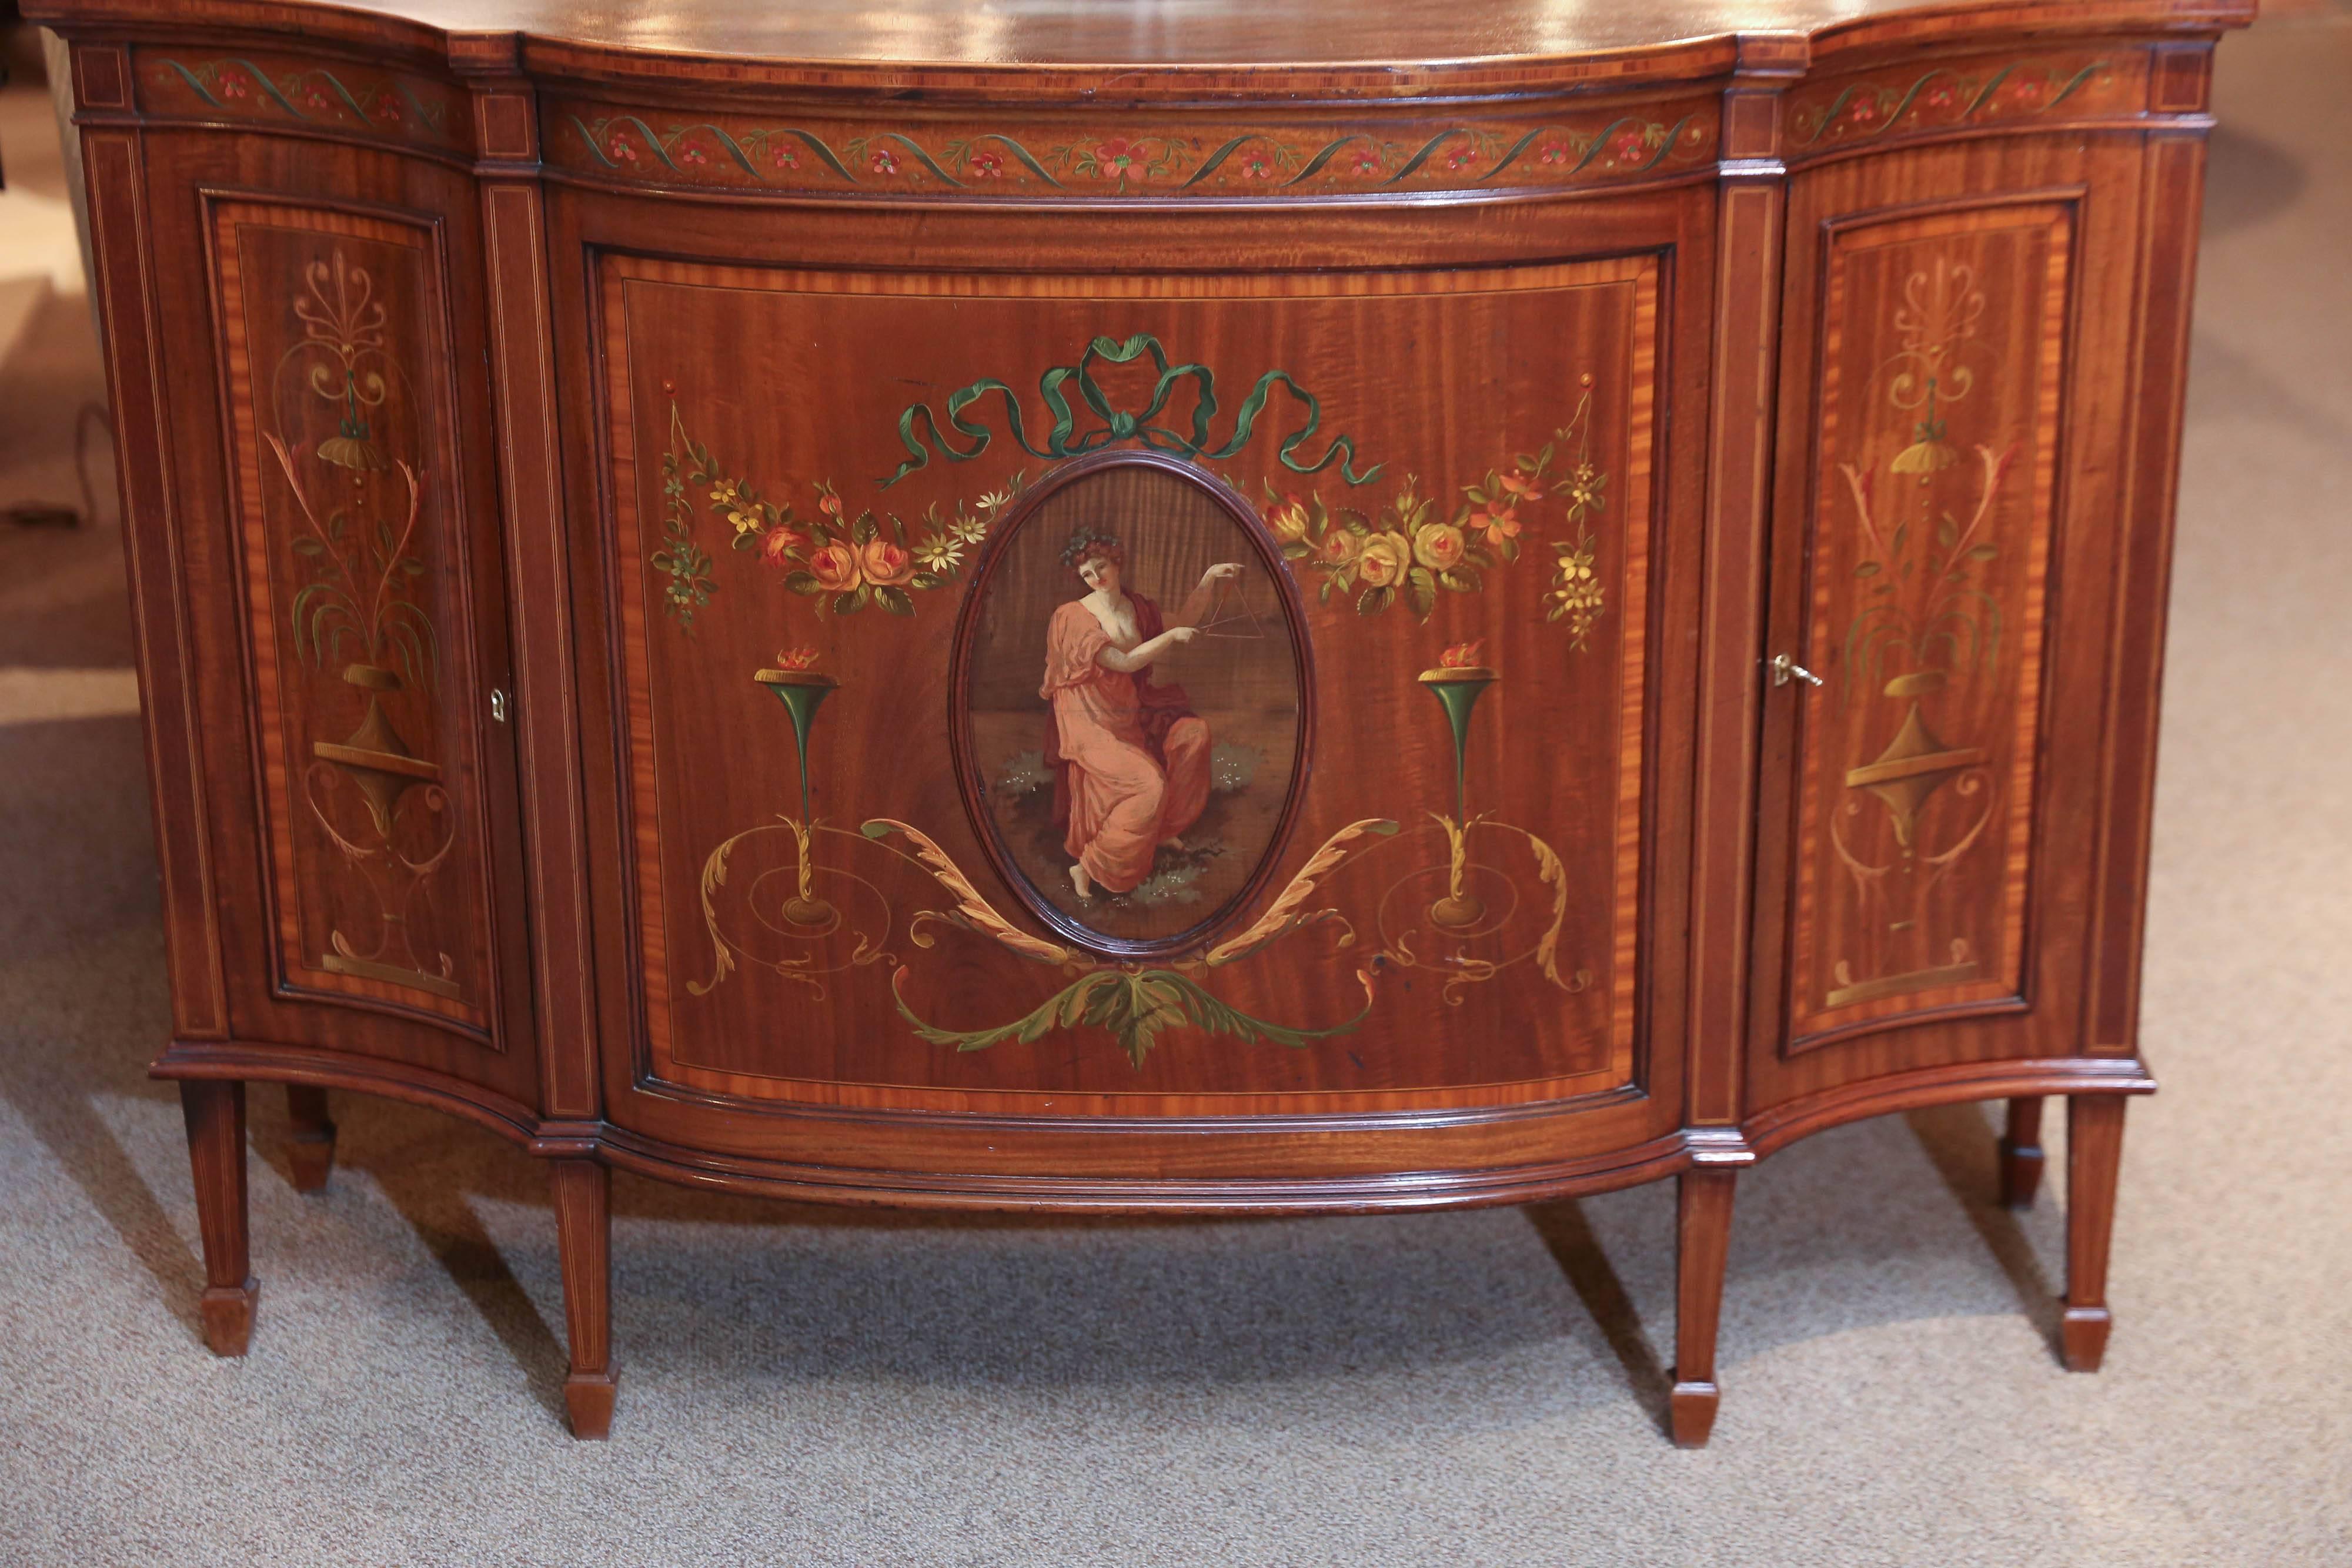 Lovely cabinet hand-painted on three sides. Painted with ribbons and floral
Scrolling patterns in pale pinks and greens. A central oval holds a classical
Woman holding a musical triangle. The shape of the piece gracefully bows
Out in the front.